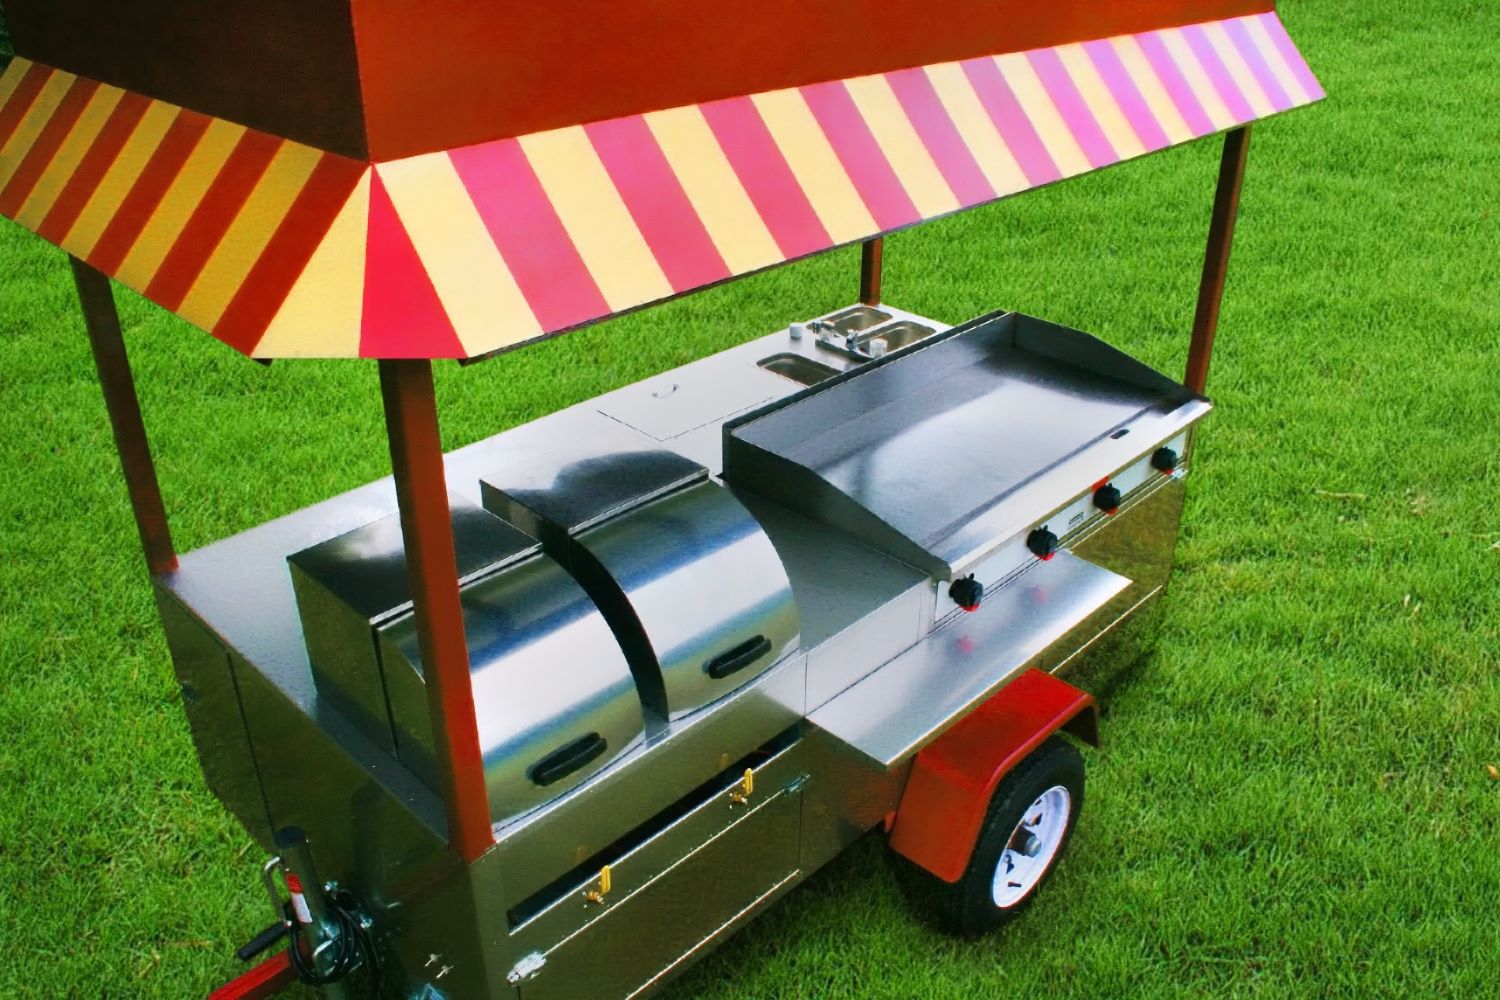 DIY Hot Dog Cart: How To Build Your Own Mobile Food Stand